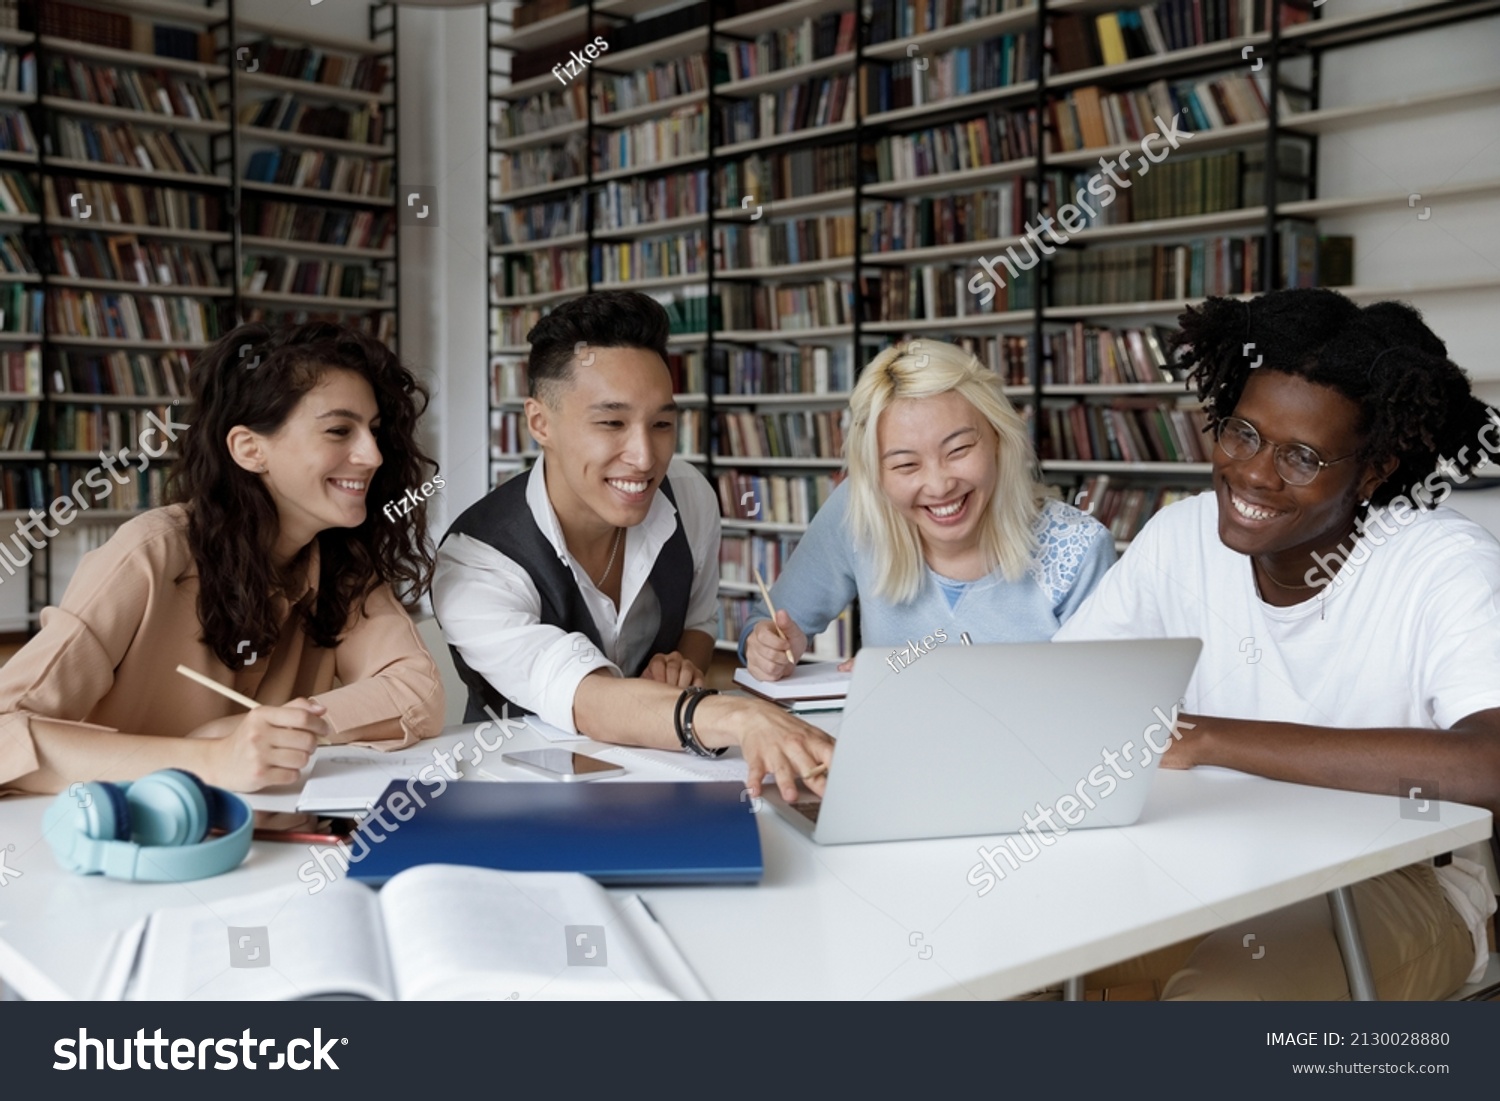 Happy four young multiethnic college students looking at laptop screen, watching educational online lecture or webinar, working on school project, preparing for exams in library, education concept. #2130028880